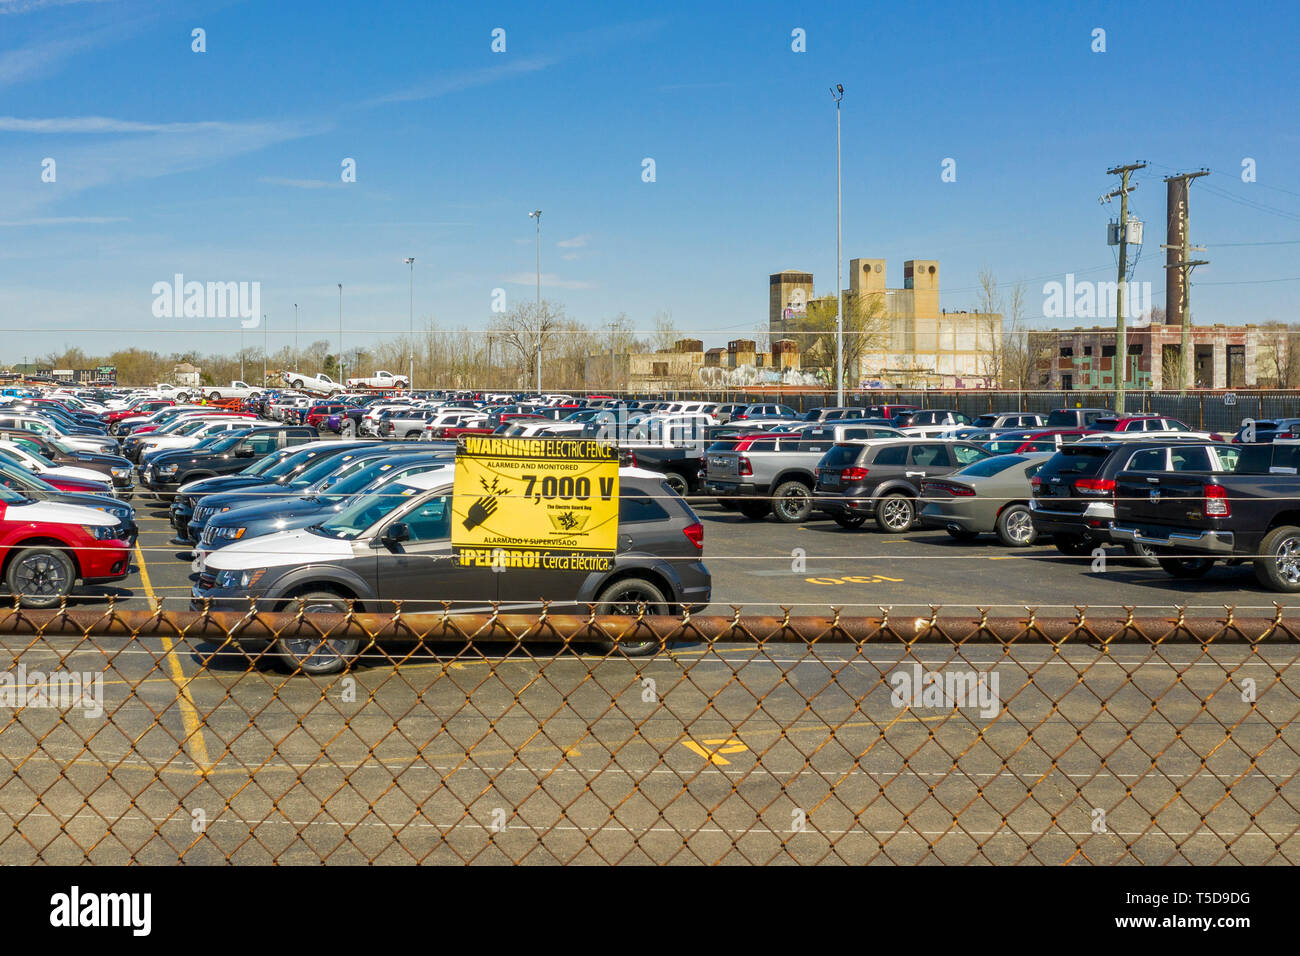 Detroit, Michigan - Trucks and cars built by Fiat Chrysler awaiting transport to dealers at Cassens Transport's Connor Yard. A sign warns that an elec Stock Photo